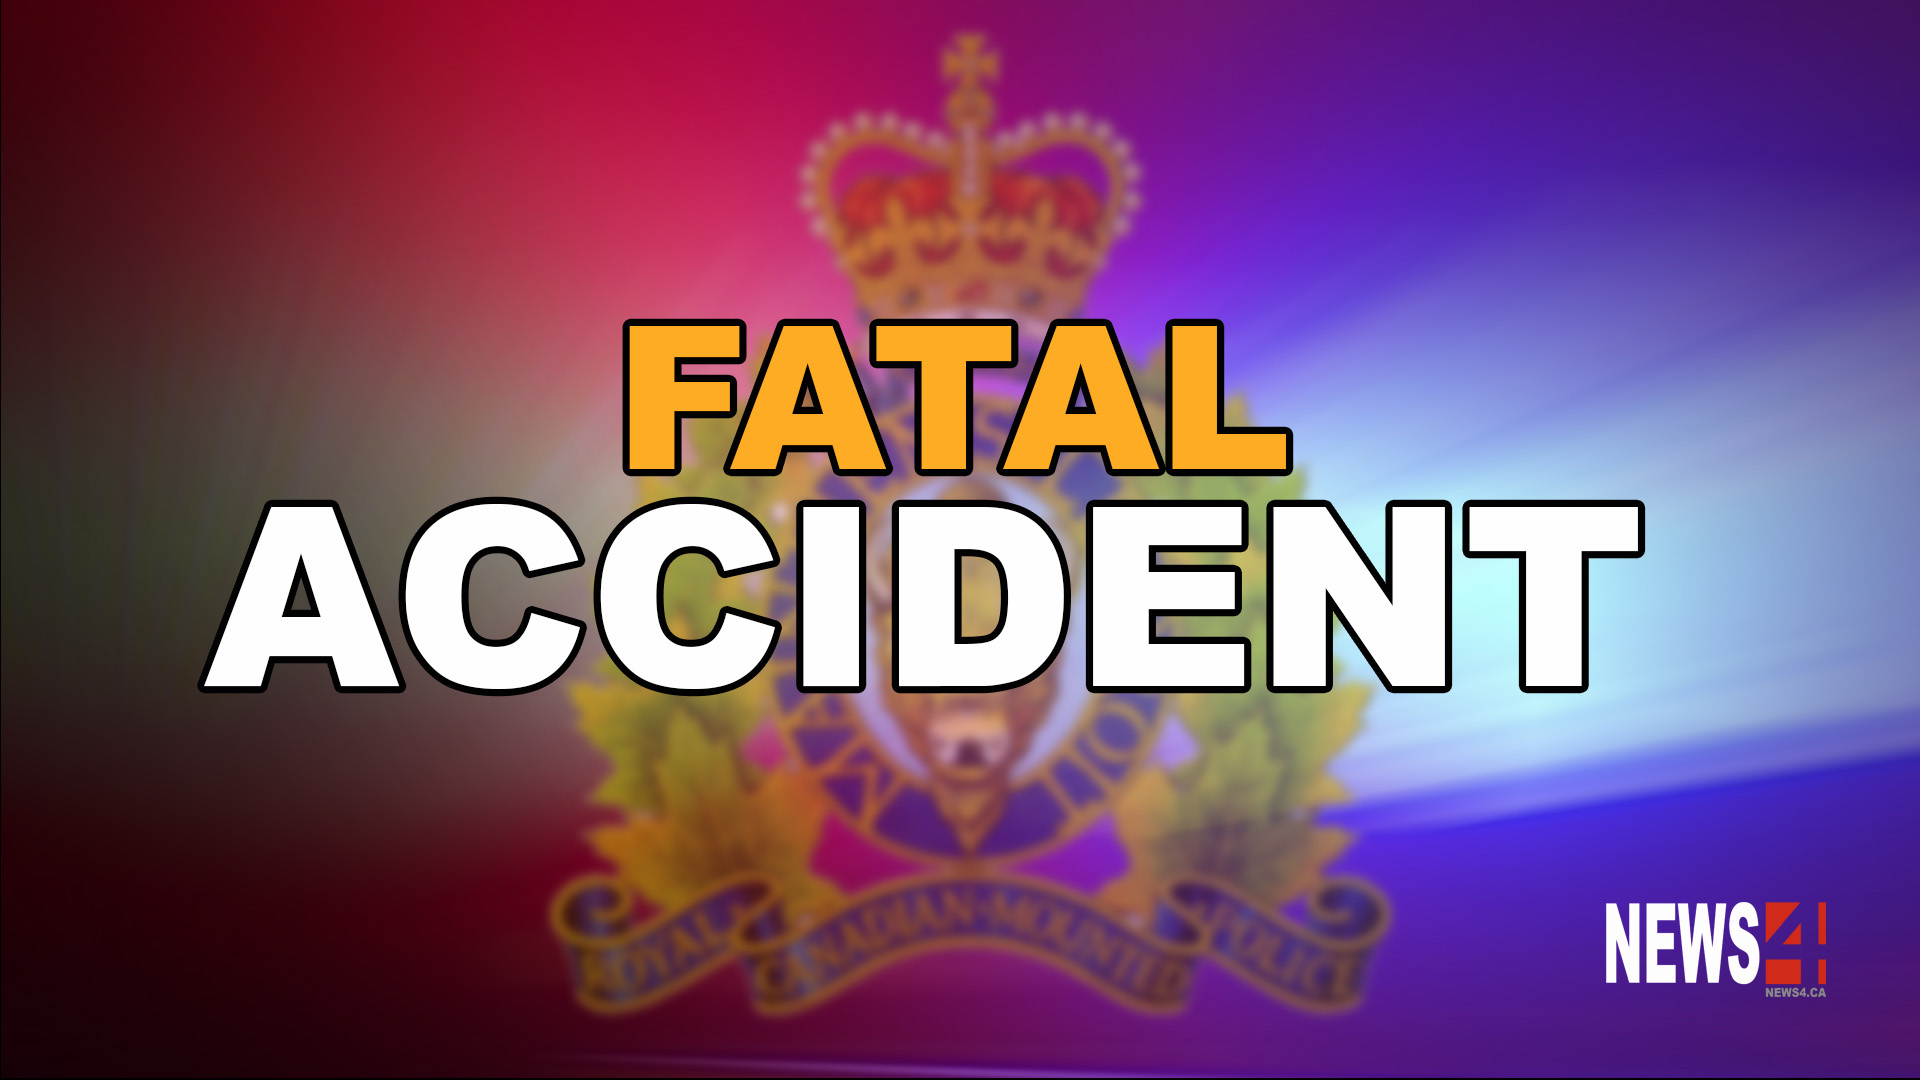 FATAL ACCIDENT GRAPHIC